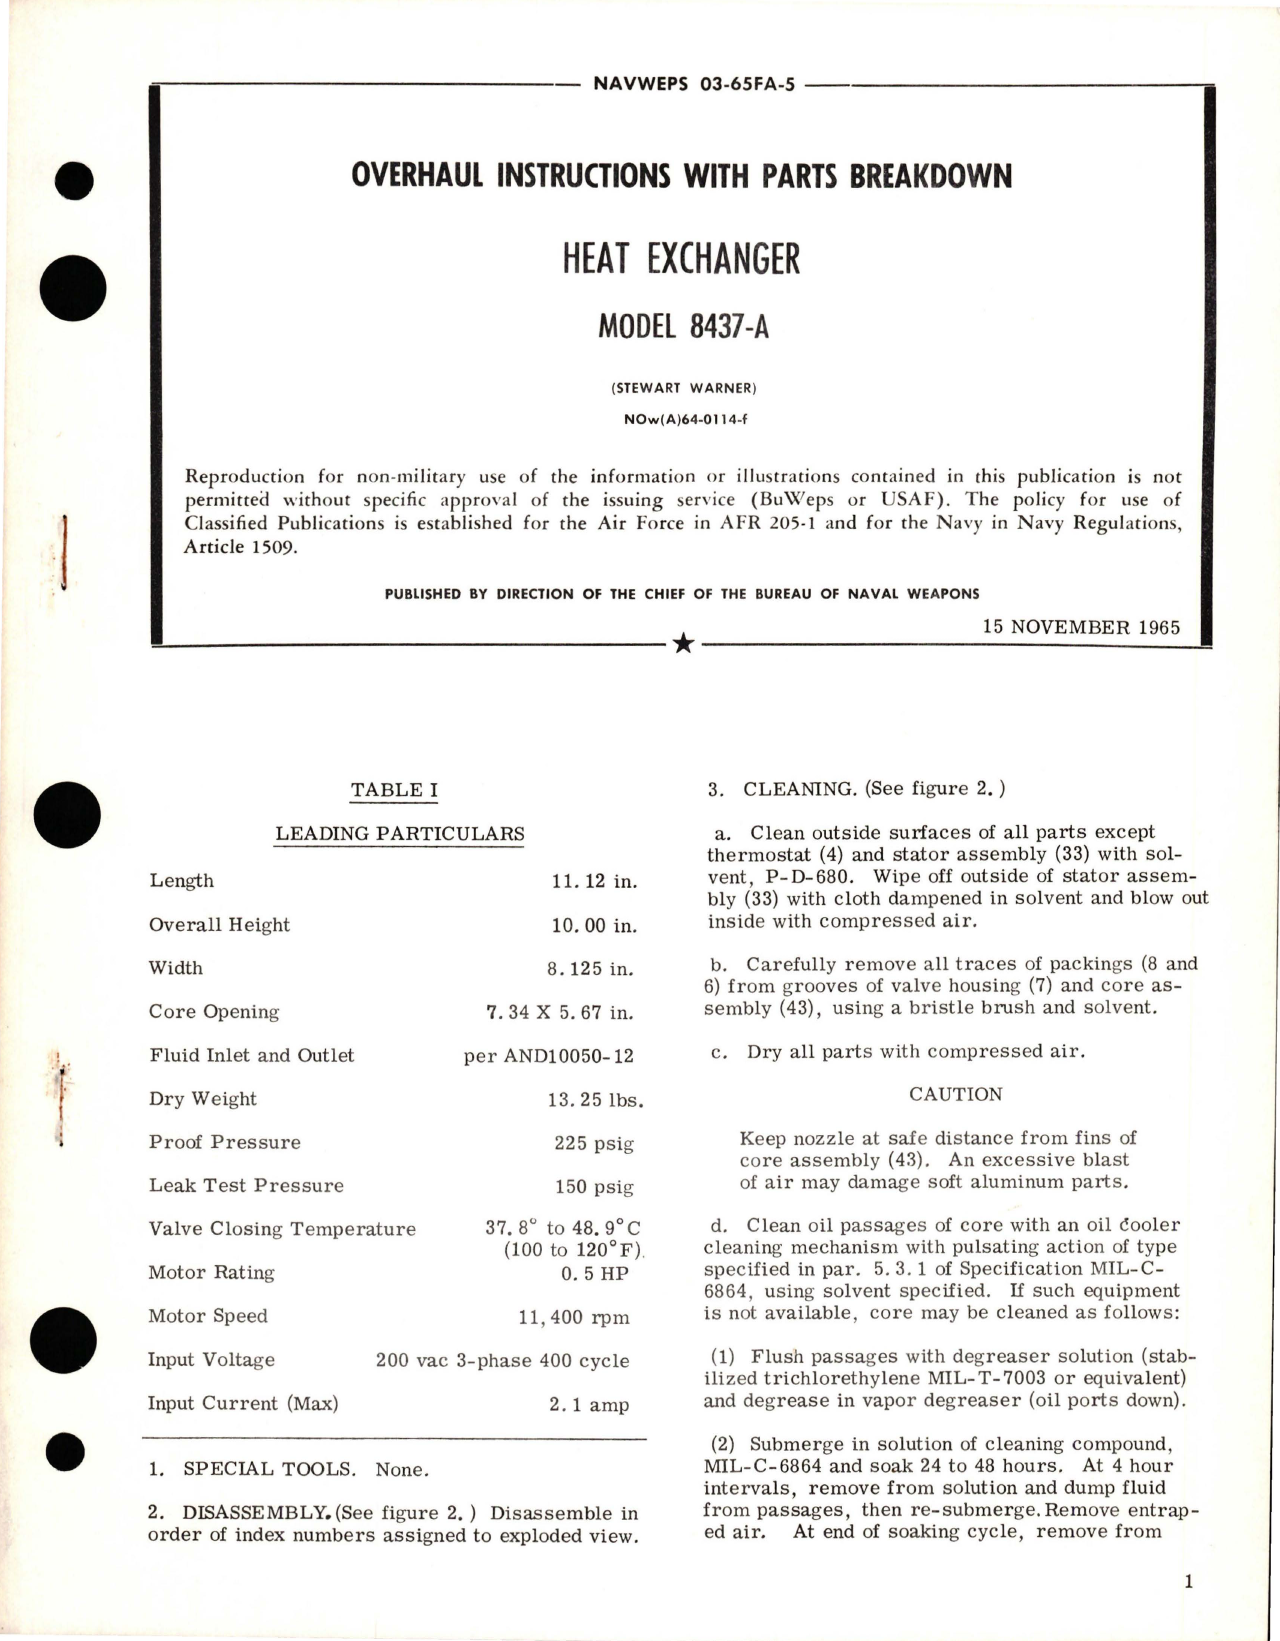 Sample page 1 from AirCorps Library document: Overhaul Instructions with Parts Breakdown for Heat Exchanger - Model 8437-A